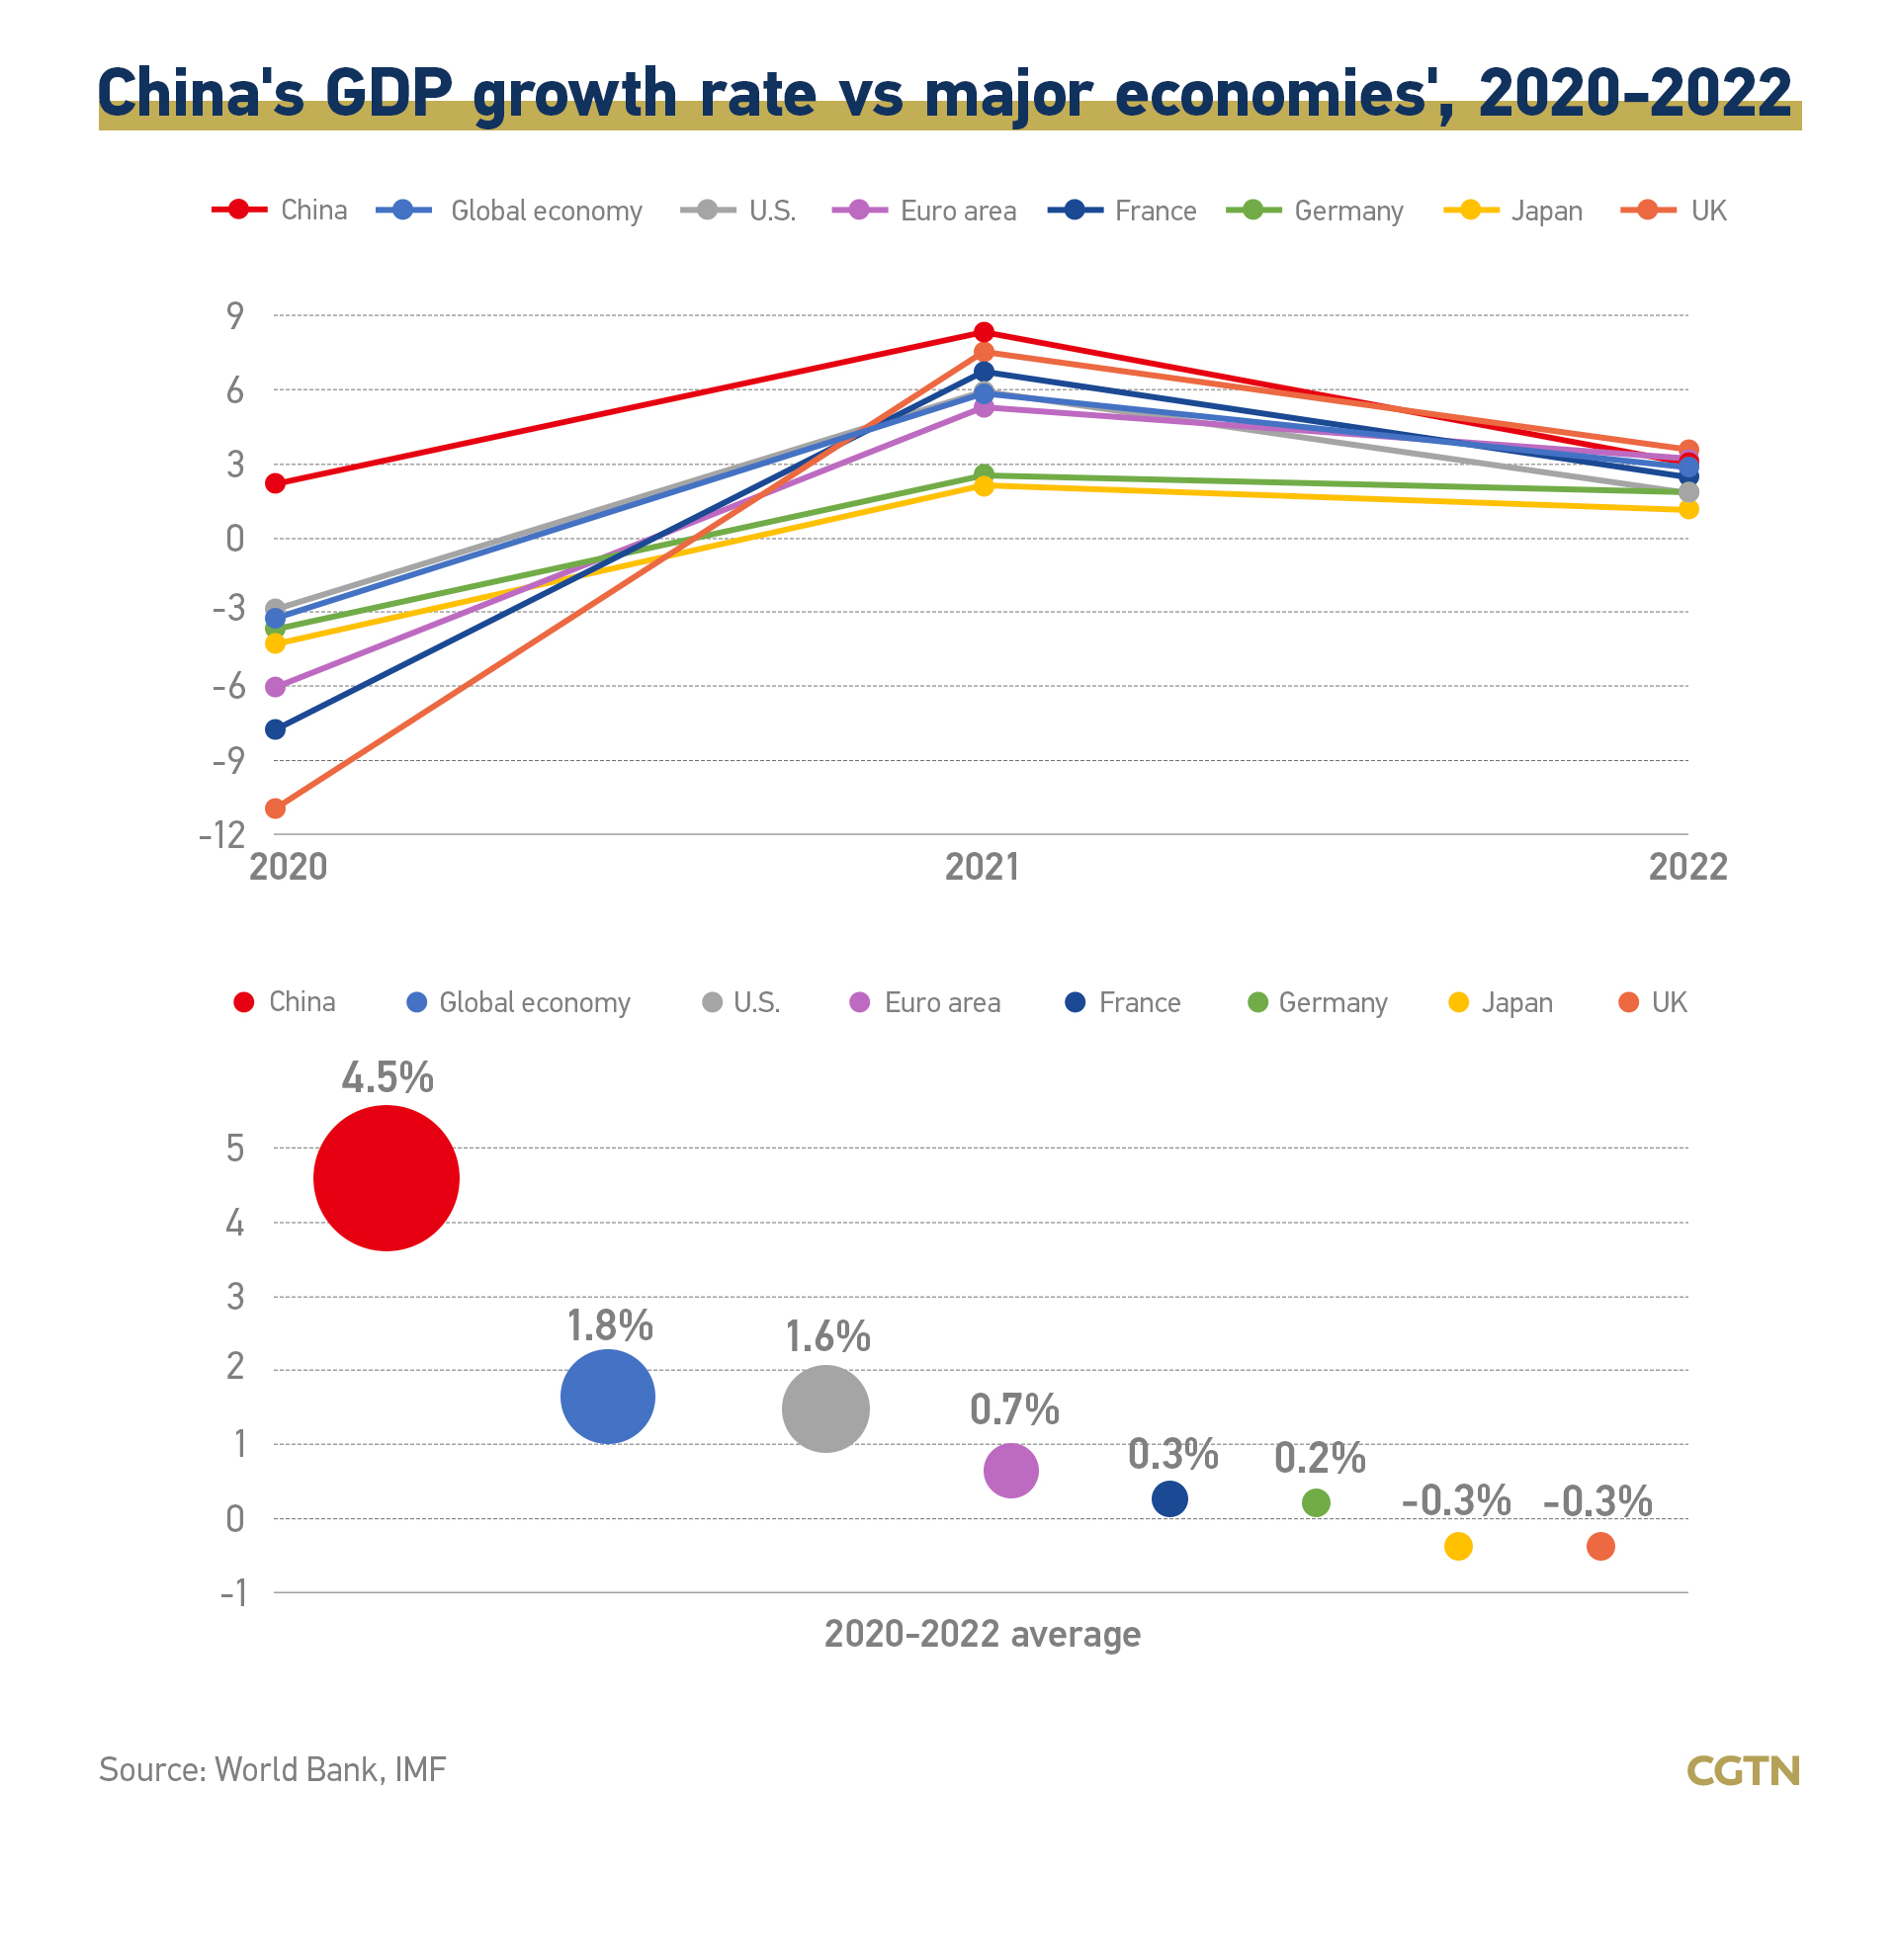 Graphics: China's GDP growth relatively fast compared to other major economies